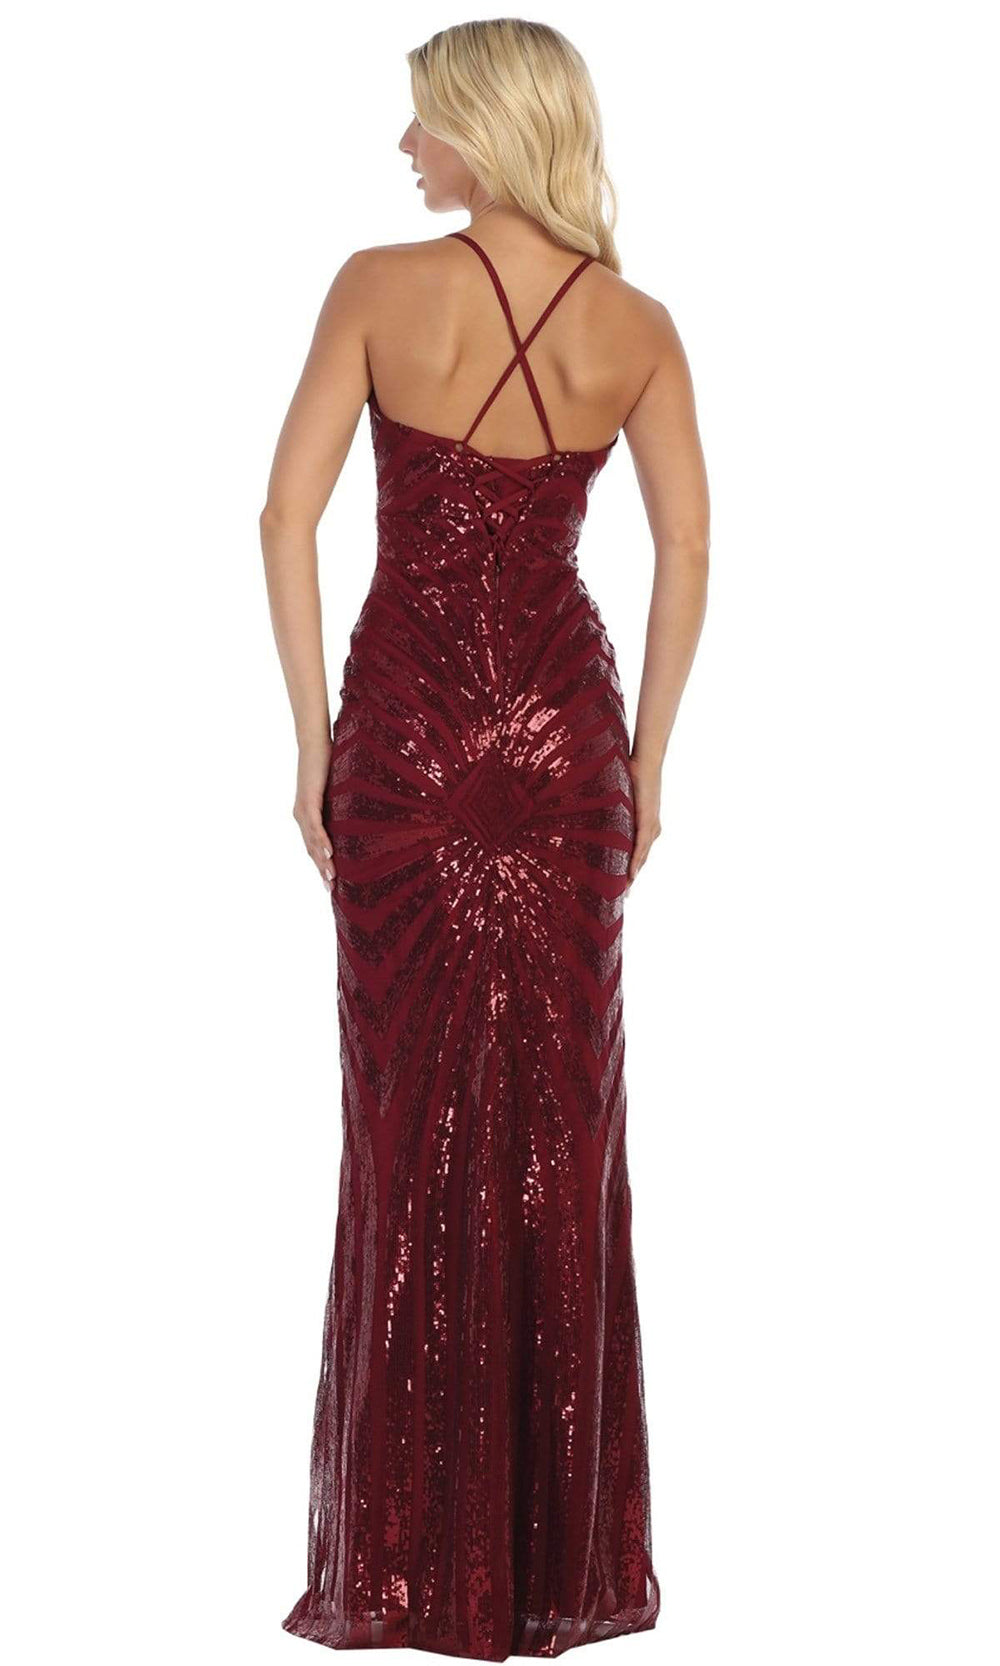 May Queen -  RQ7695SC V Neck Shinny Detailed Hot Dress In Red